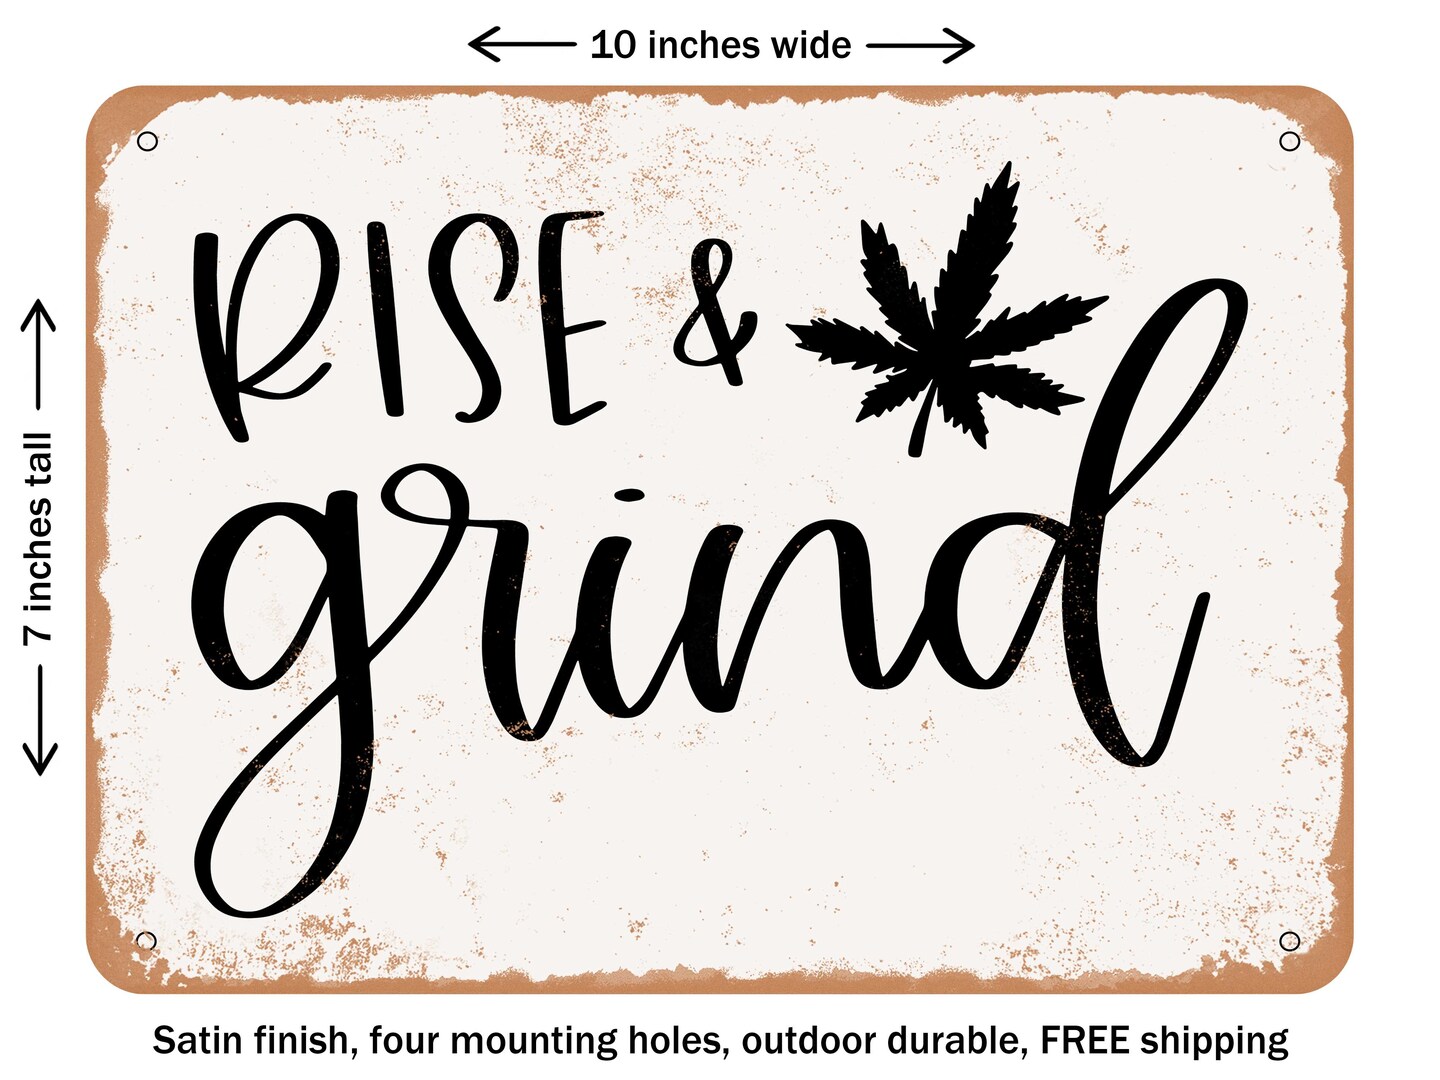 DECORATIVE METAL SIGN - Rise and Grind - Vintage Rusty Look